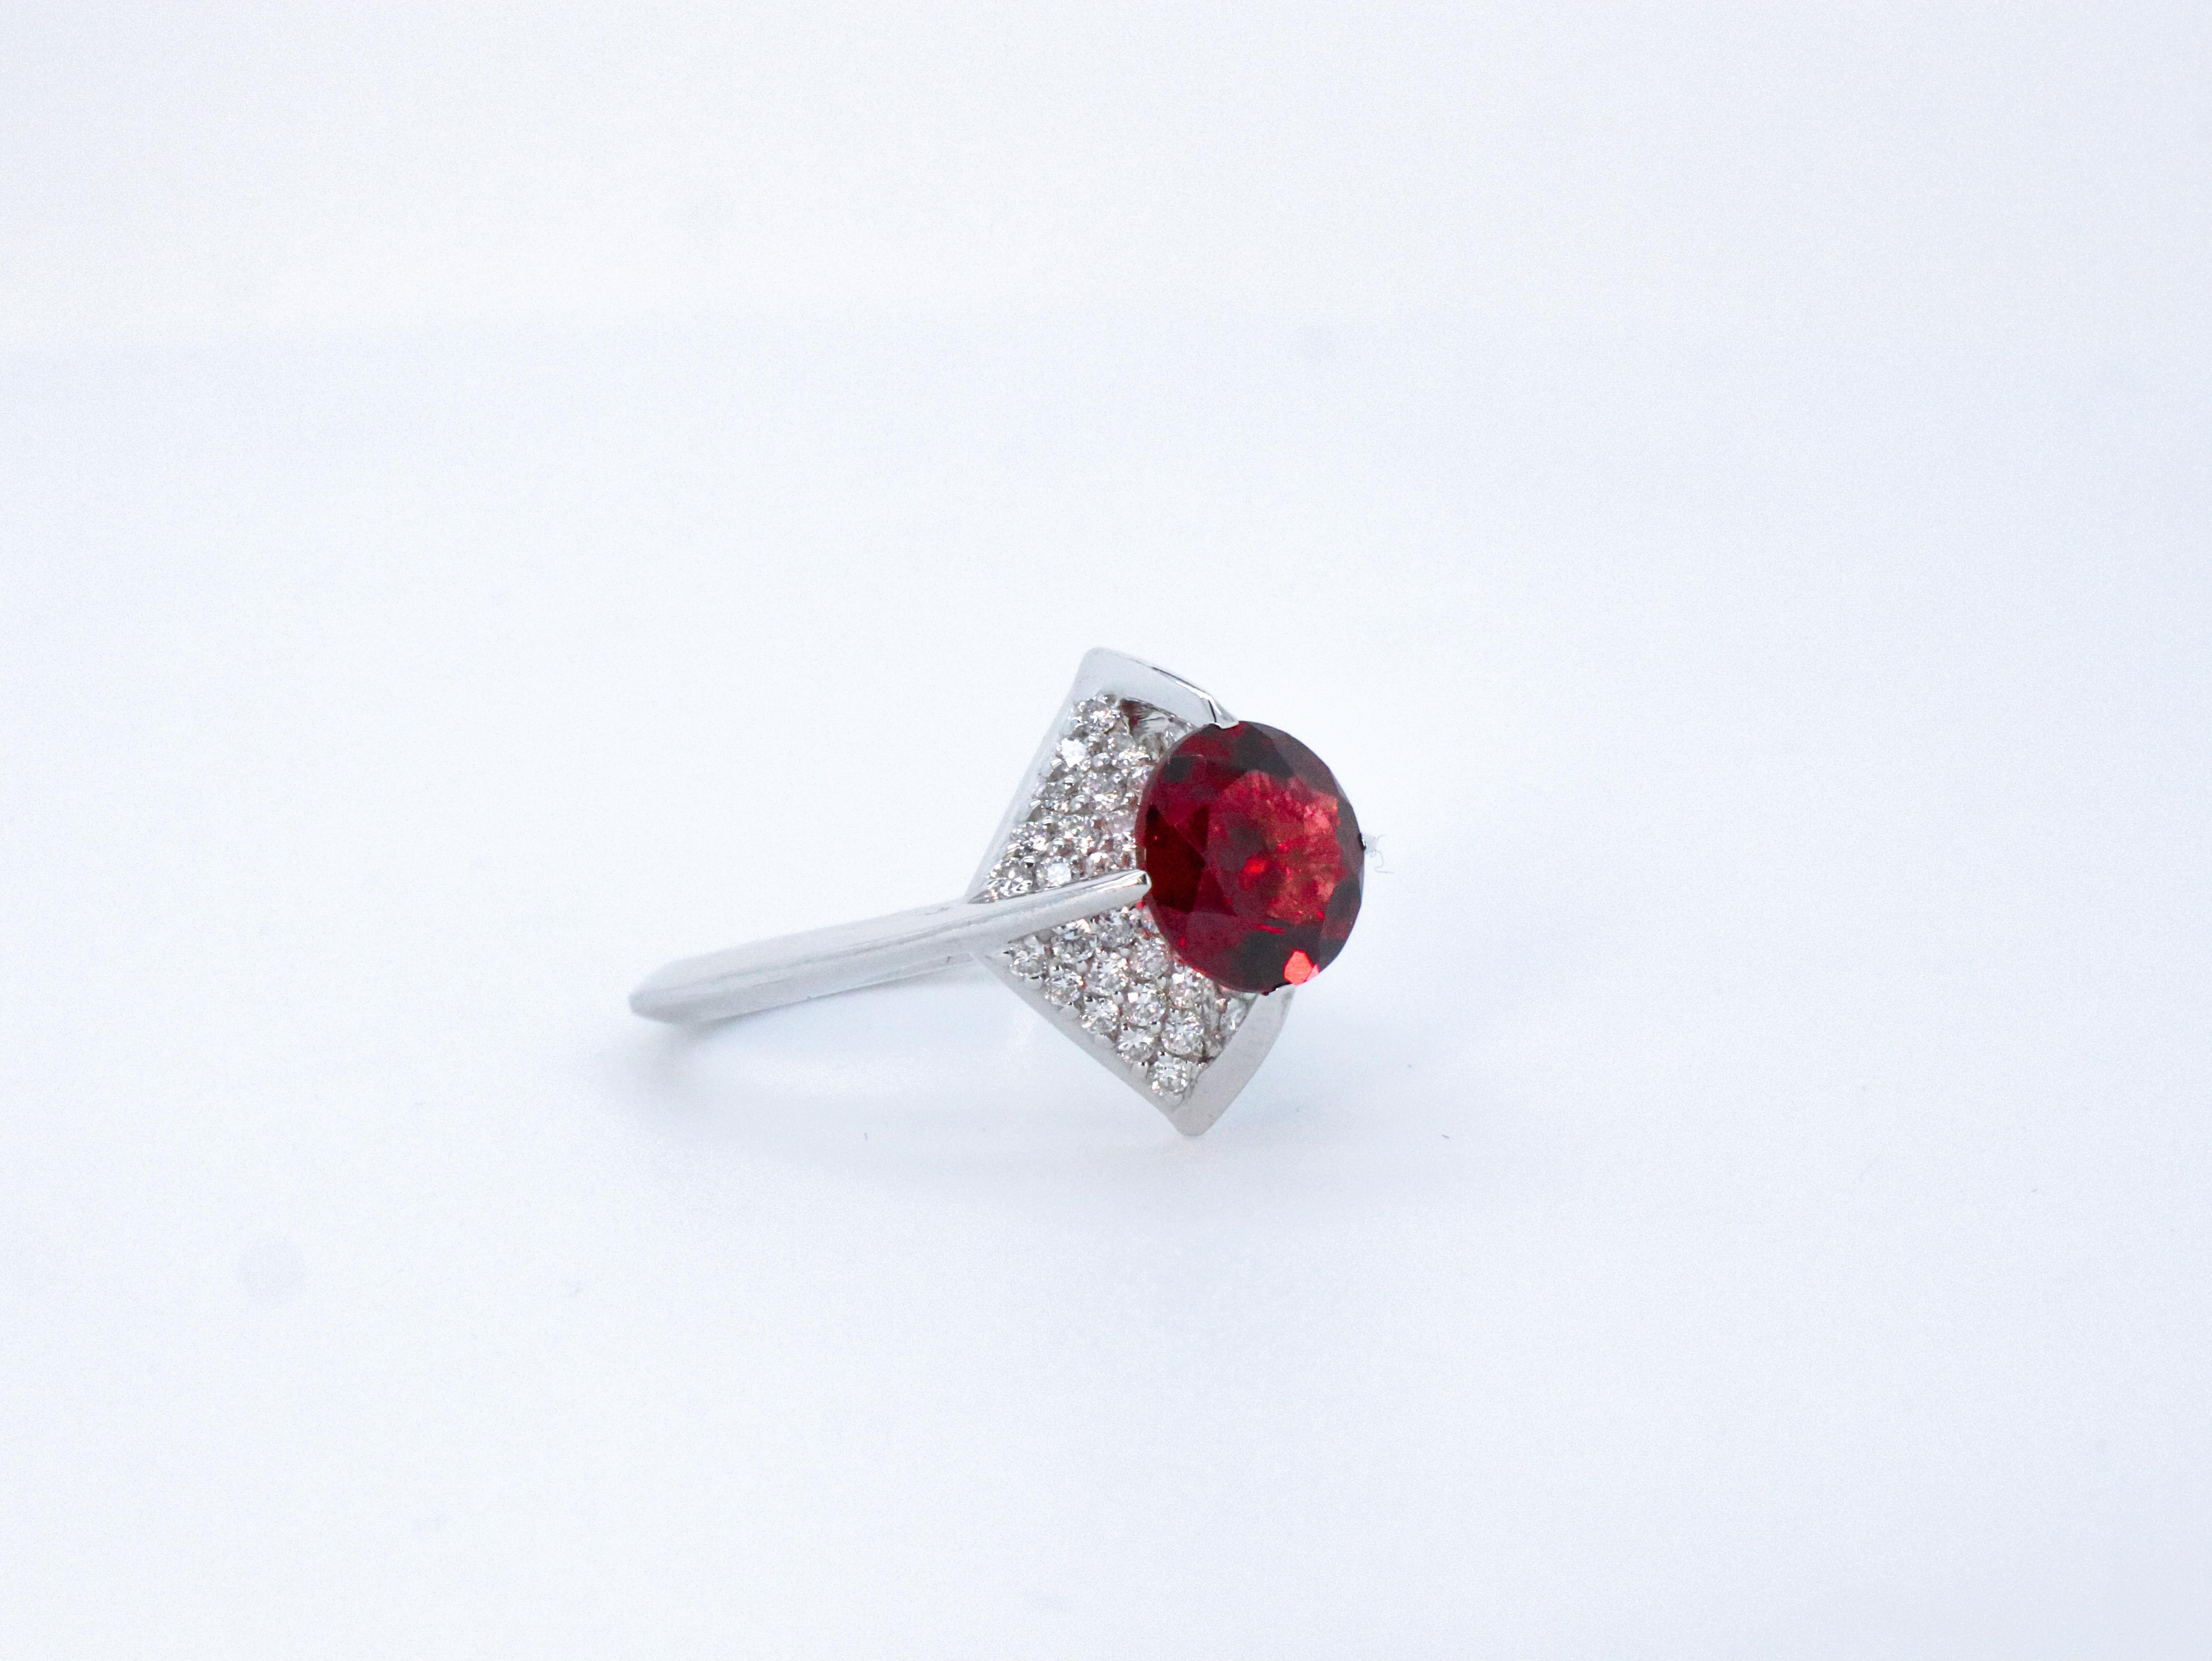 For Sale:  18K White Gold Made in Italy Diamond Rodolite Garnet Vogue Awarded Cocktail Ring 8